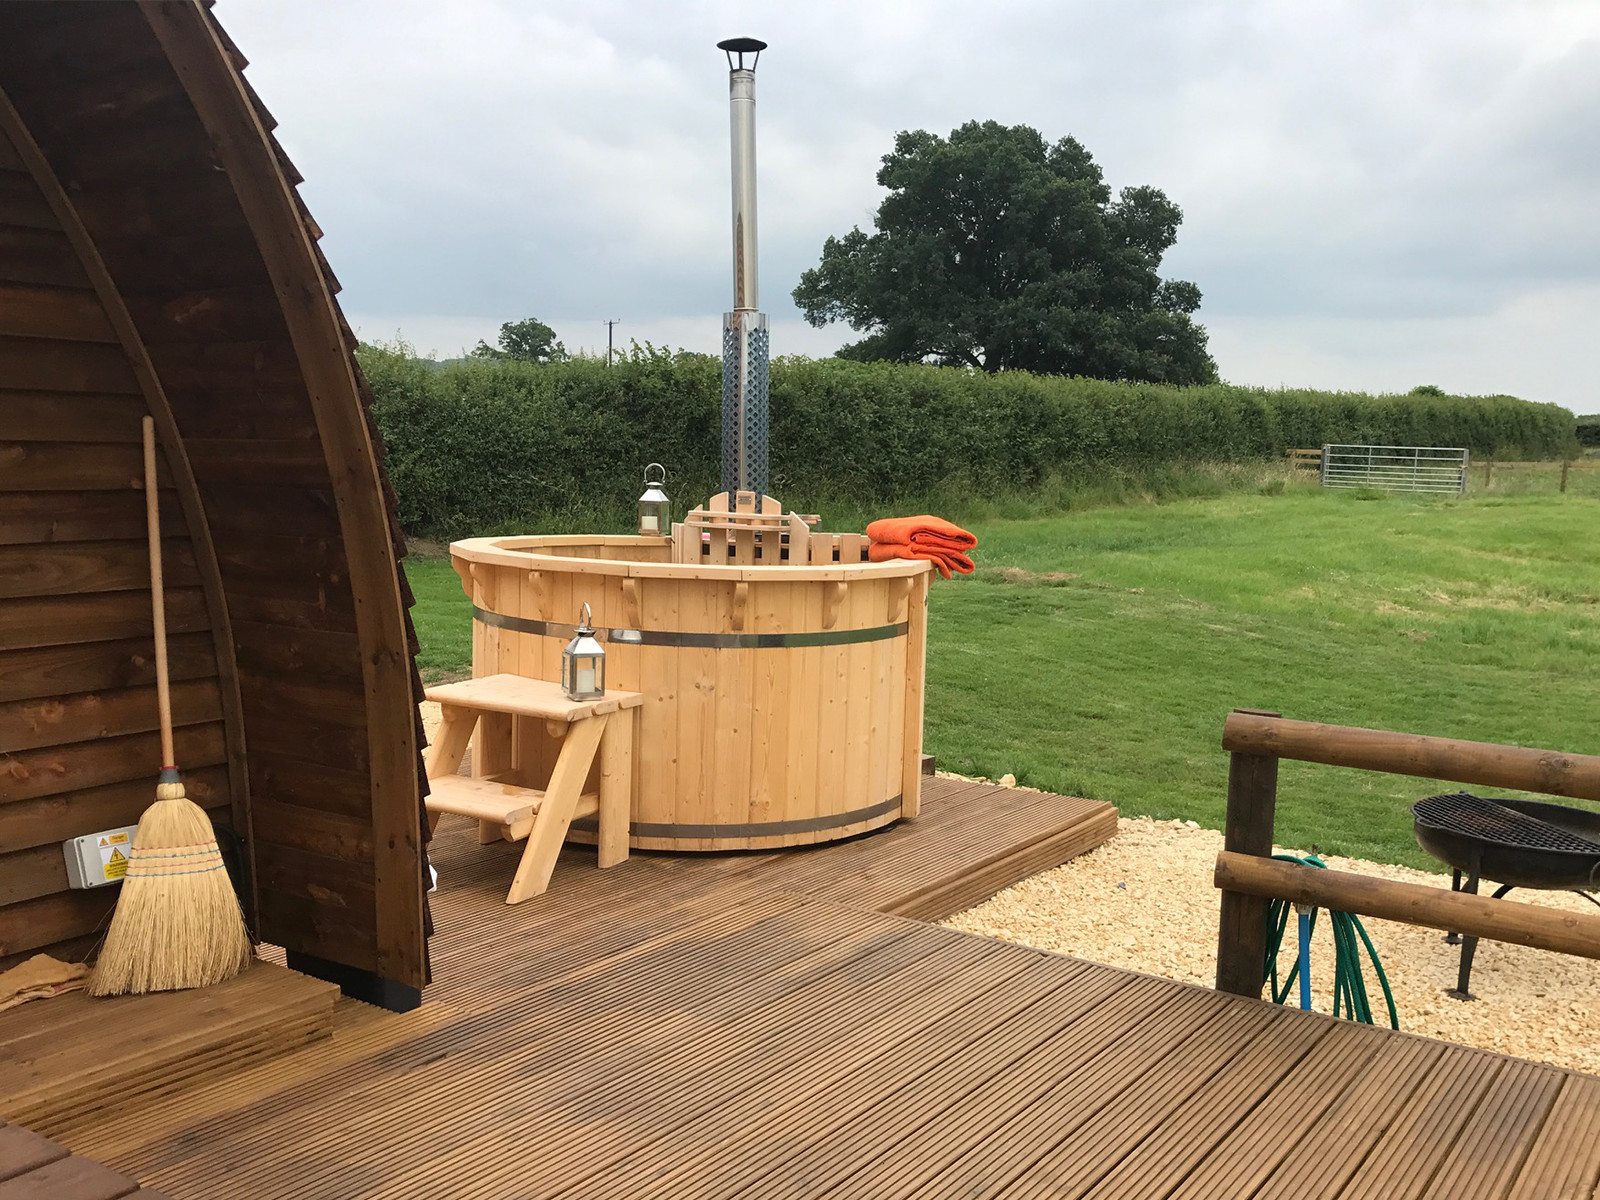 Our wood fired hot tubs are perfect for watching the sunset followed by some romantic stargazing